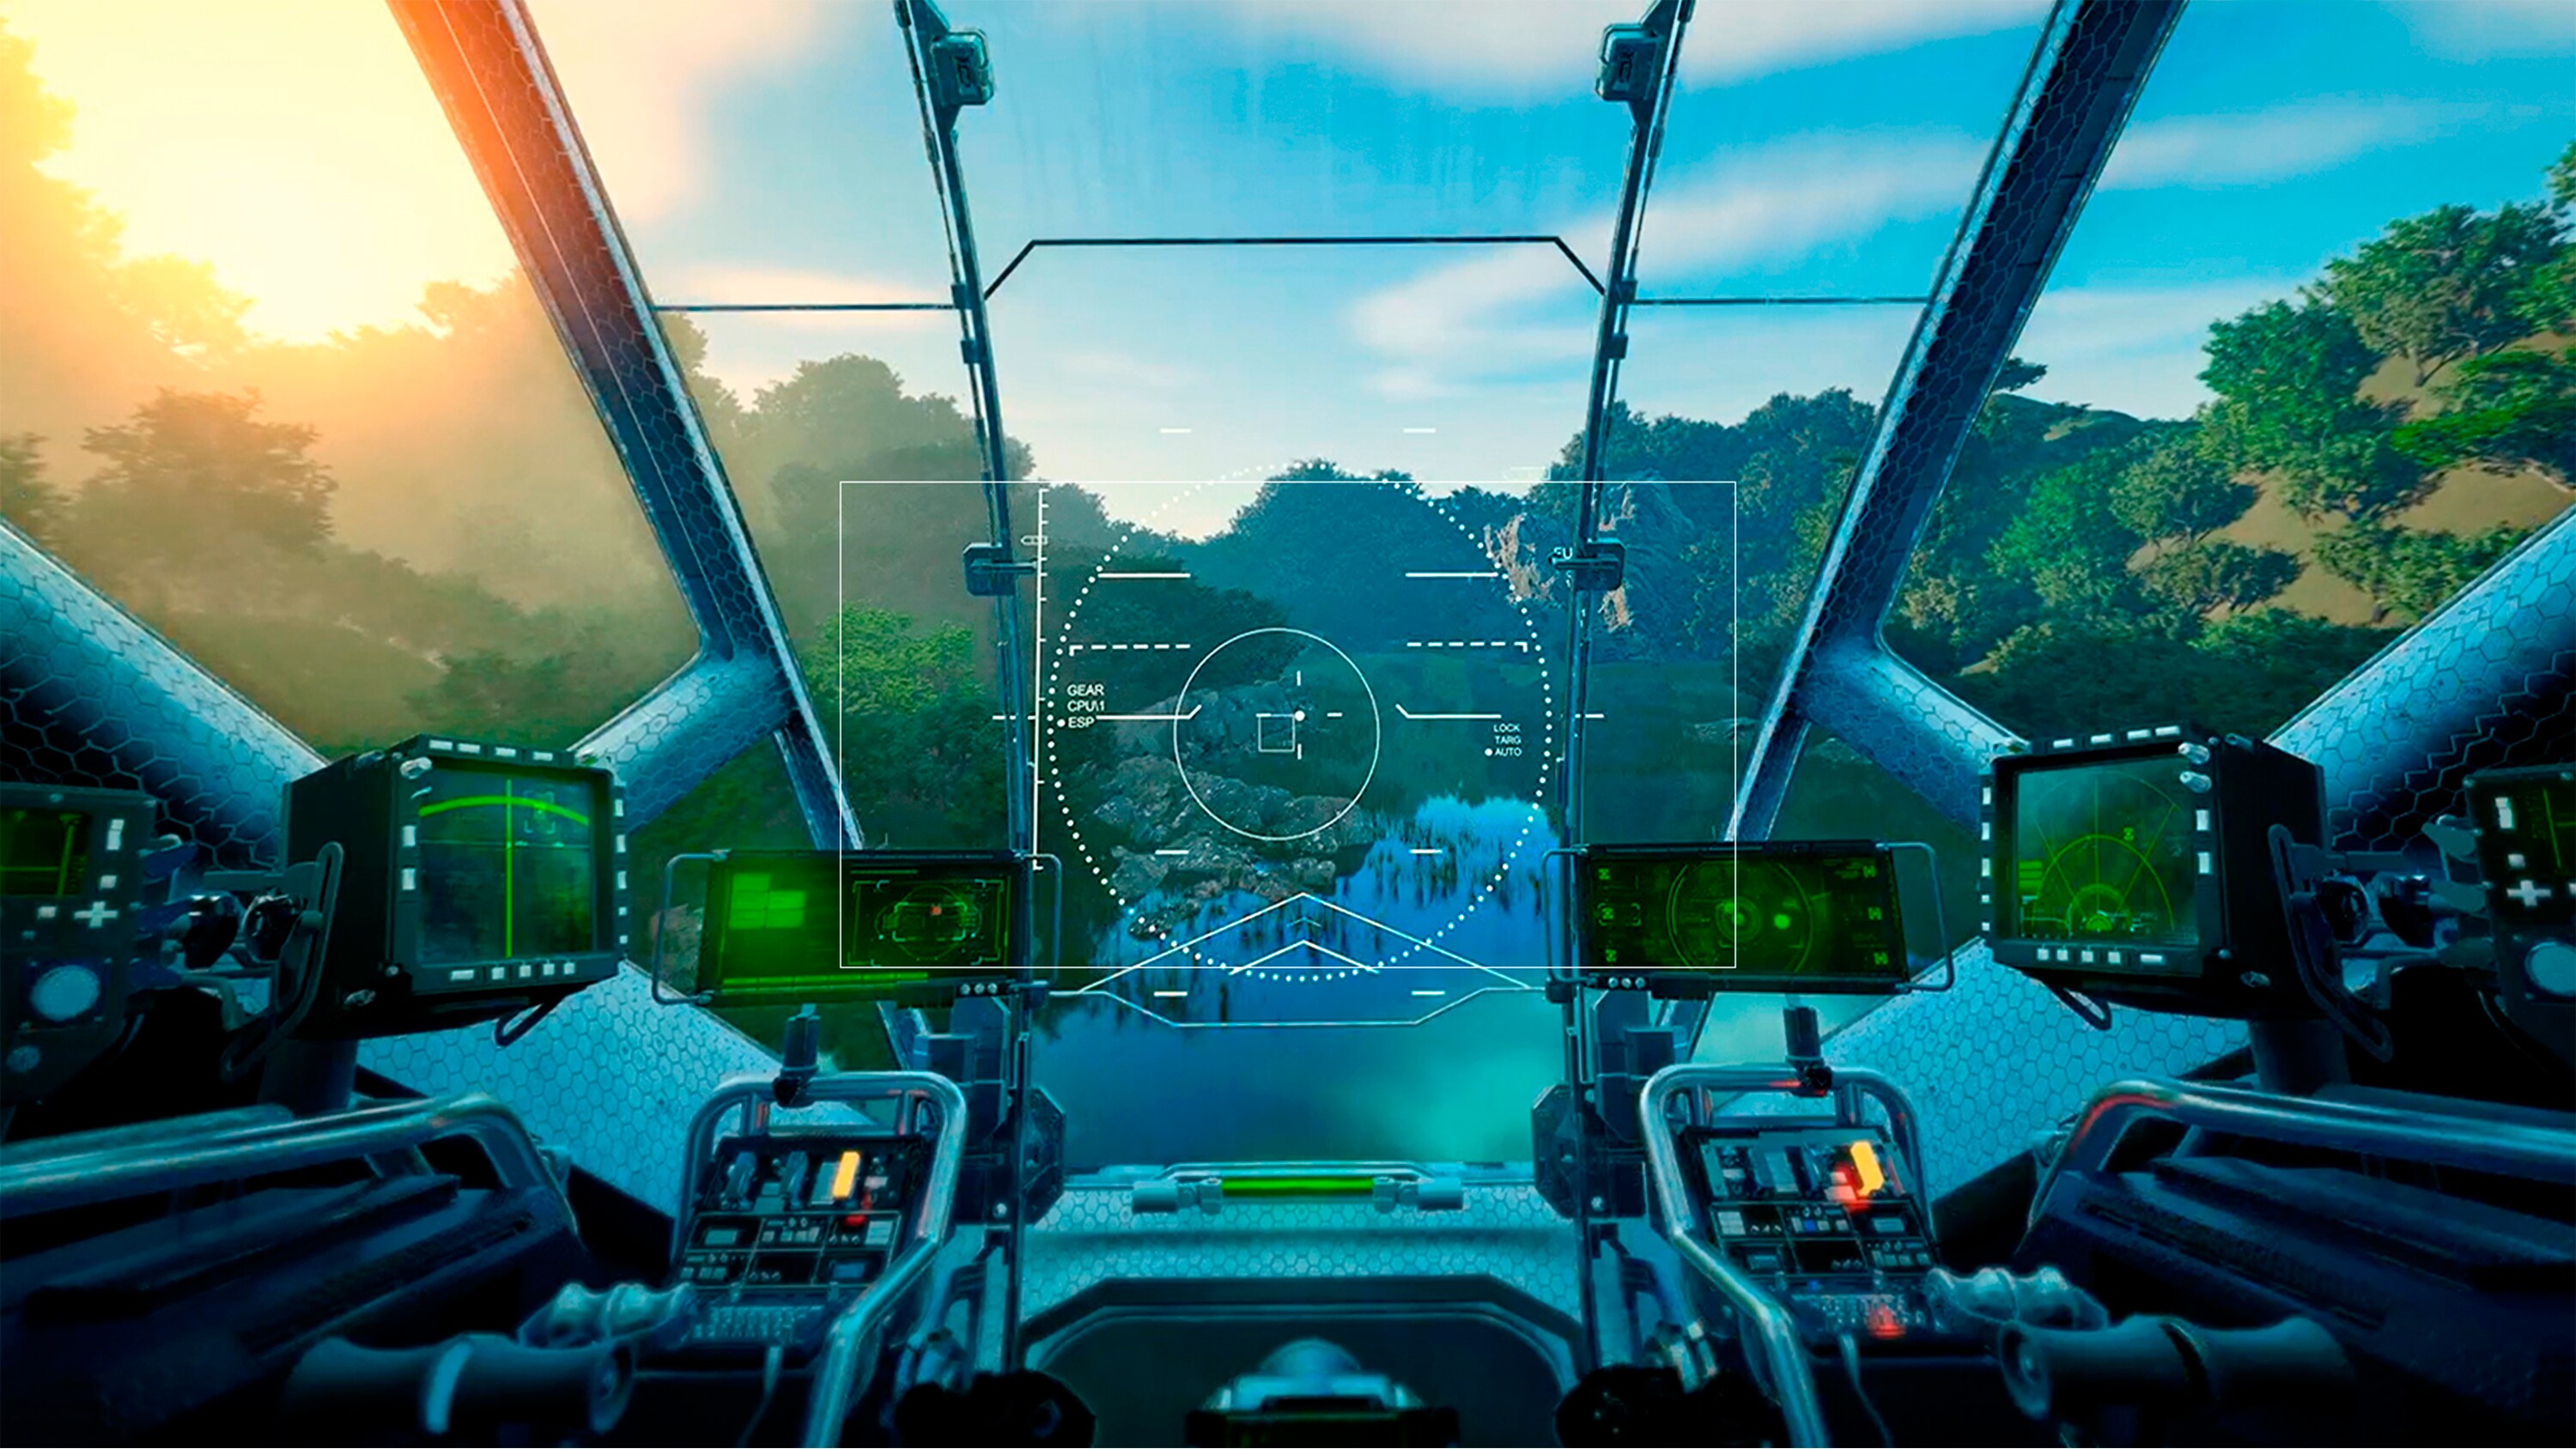 Game image of an airplane control panel.